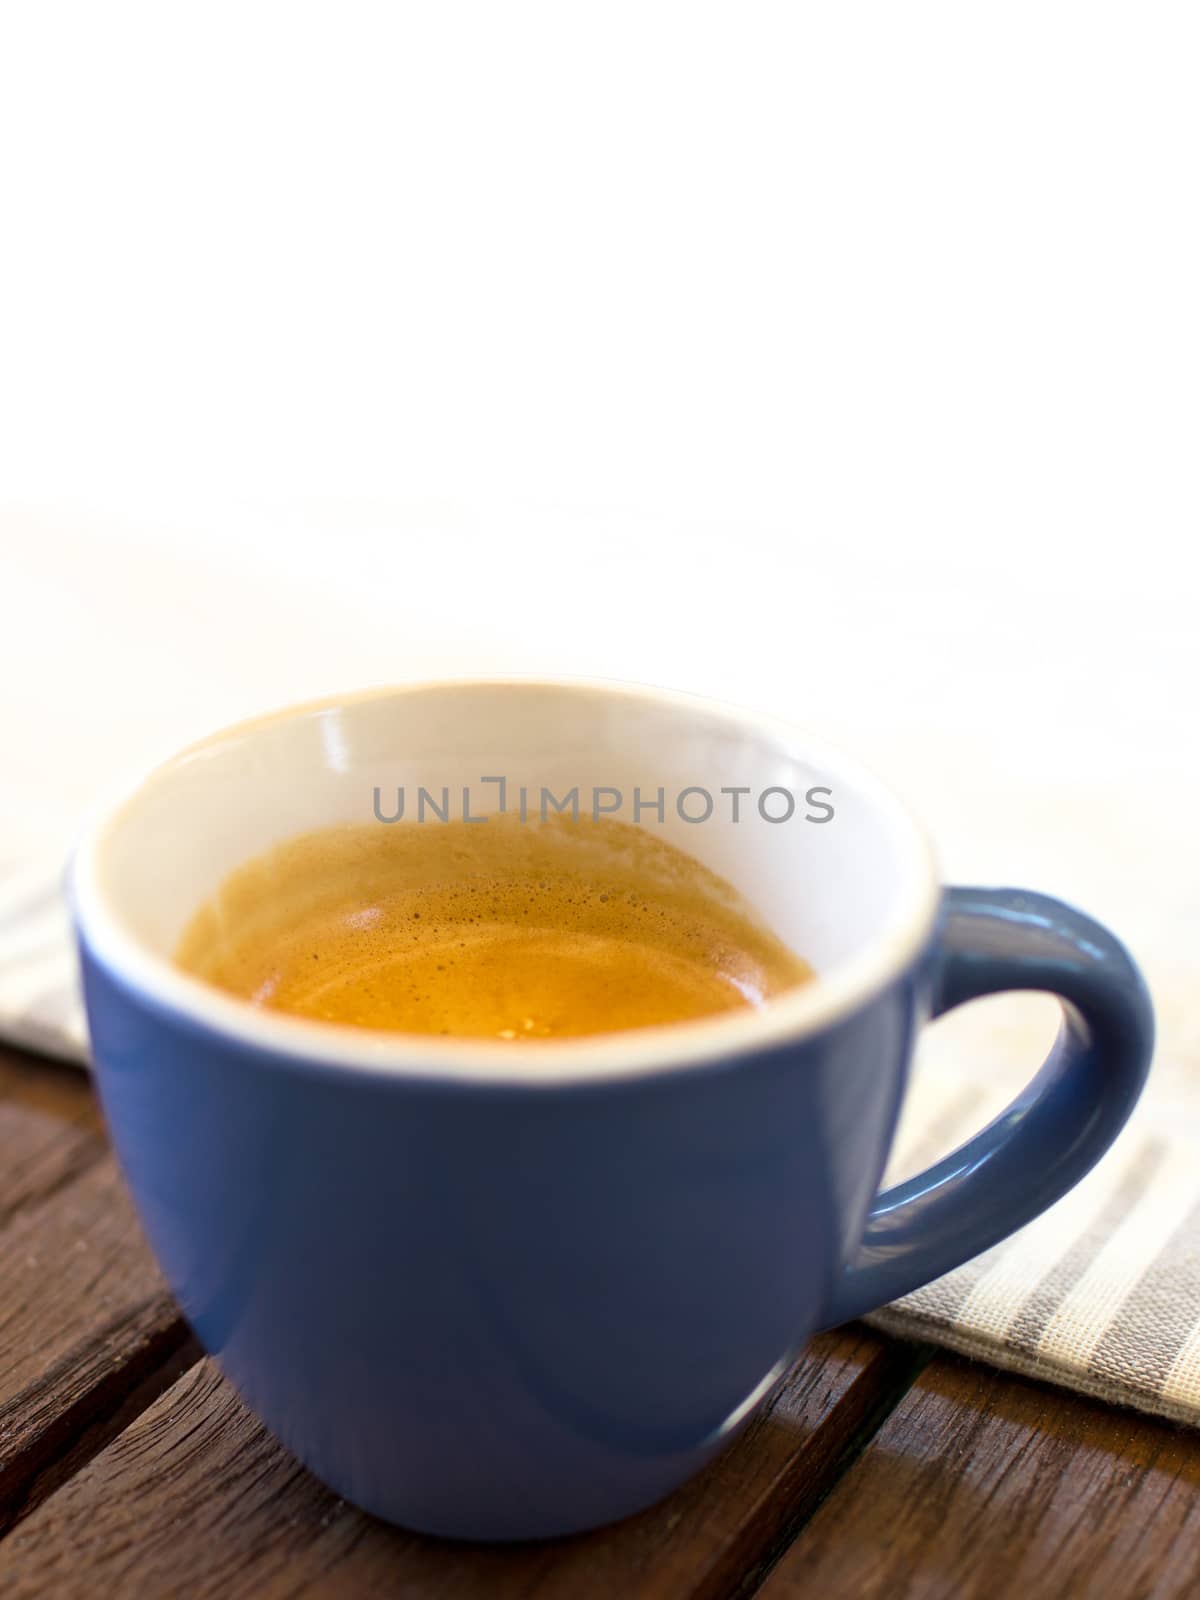 Cup of coffee on wooden table and white background for copy space.